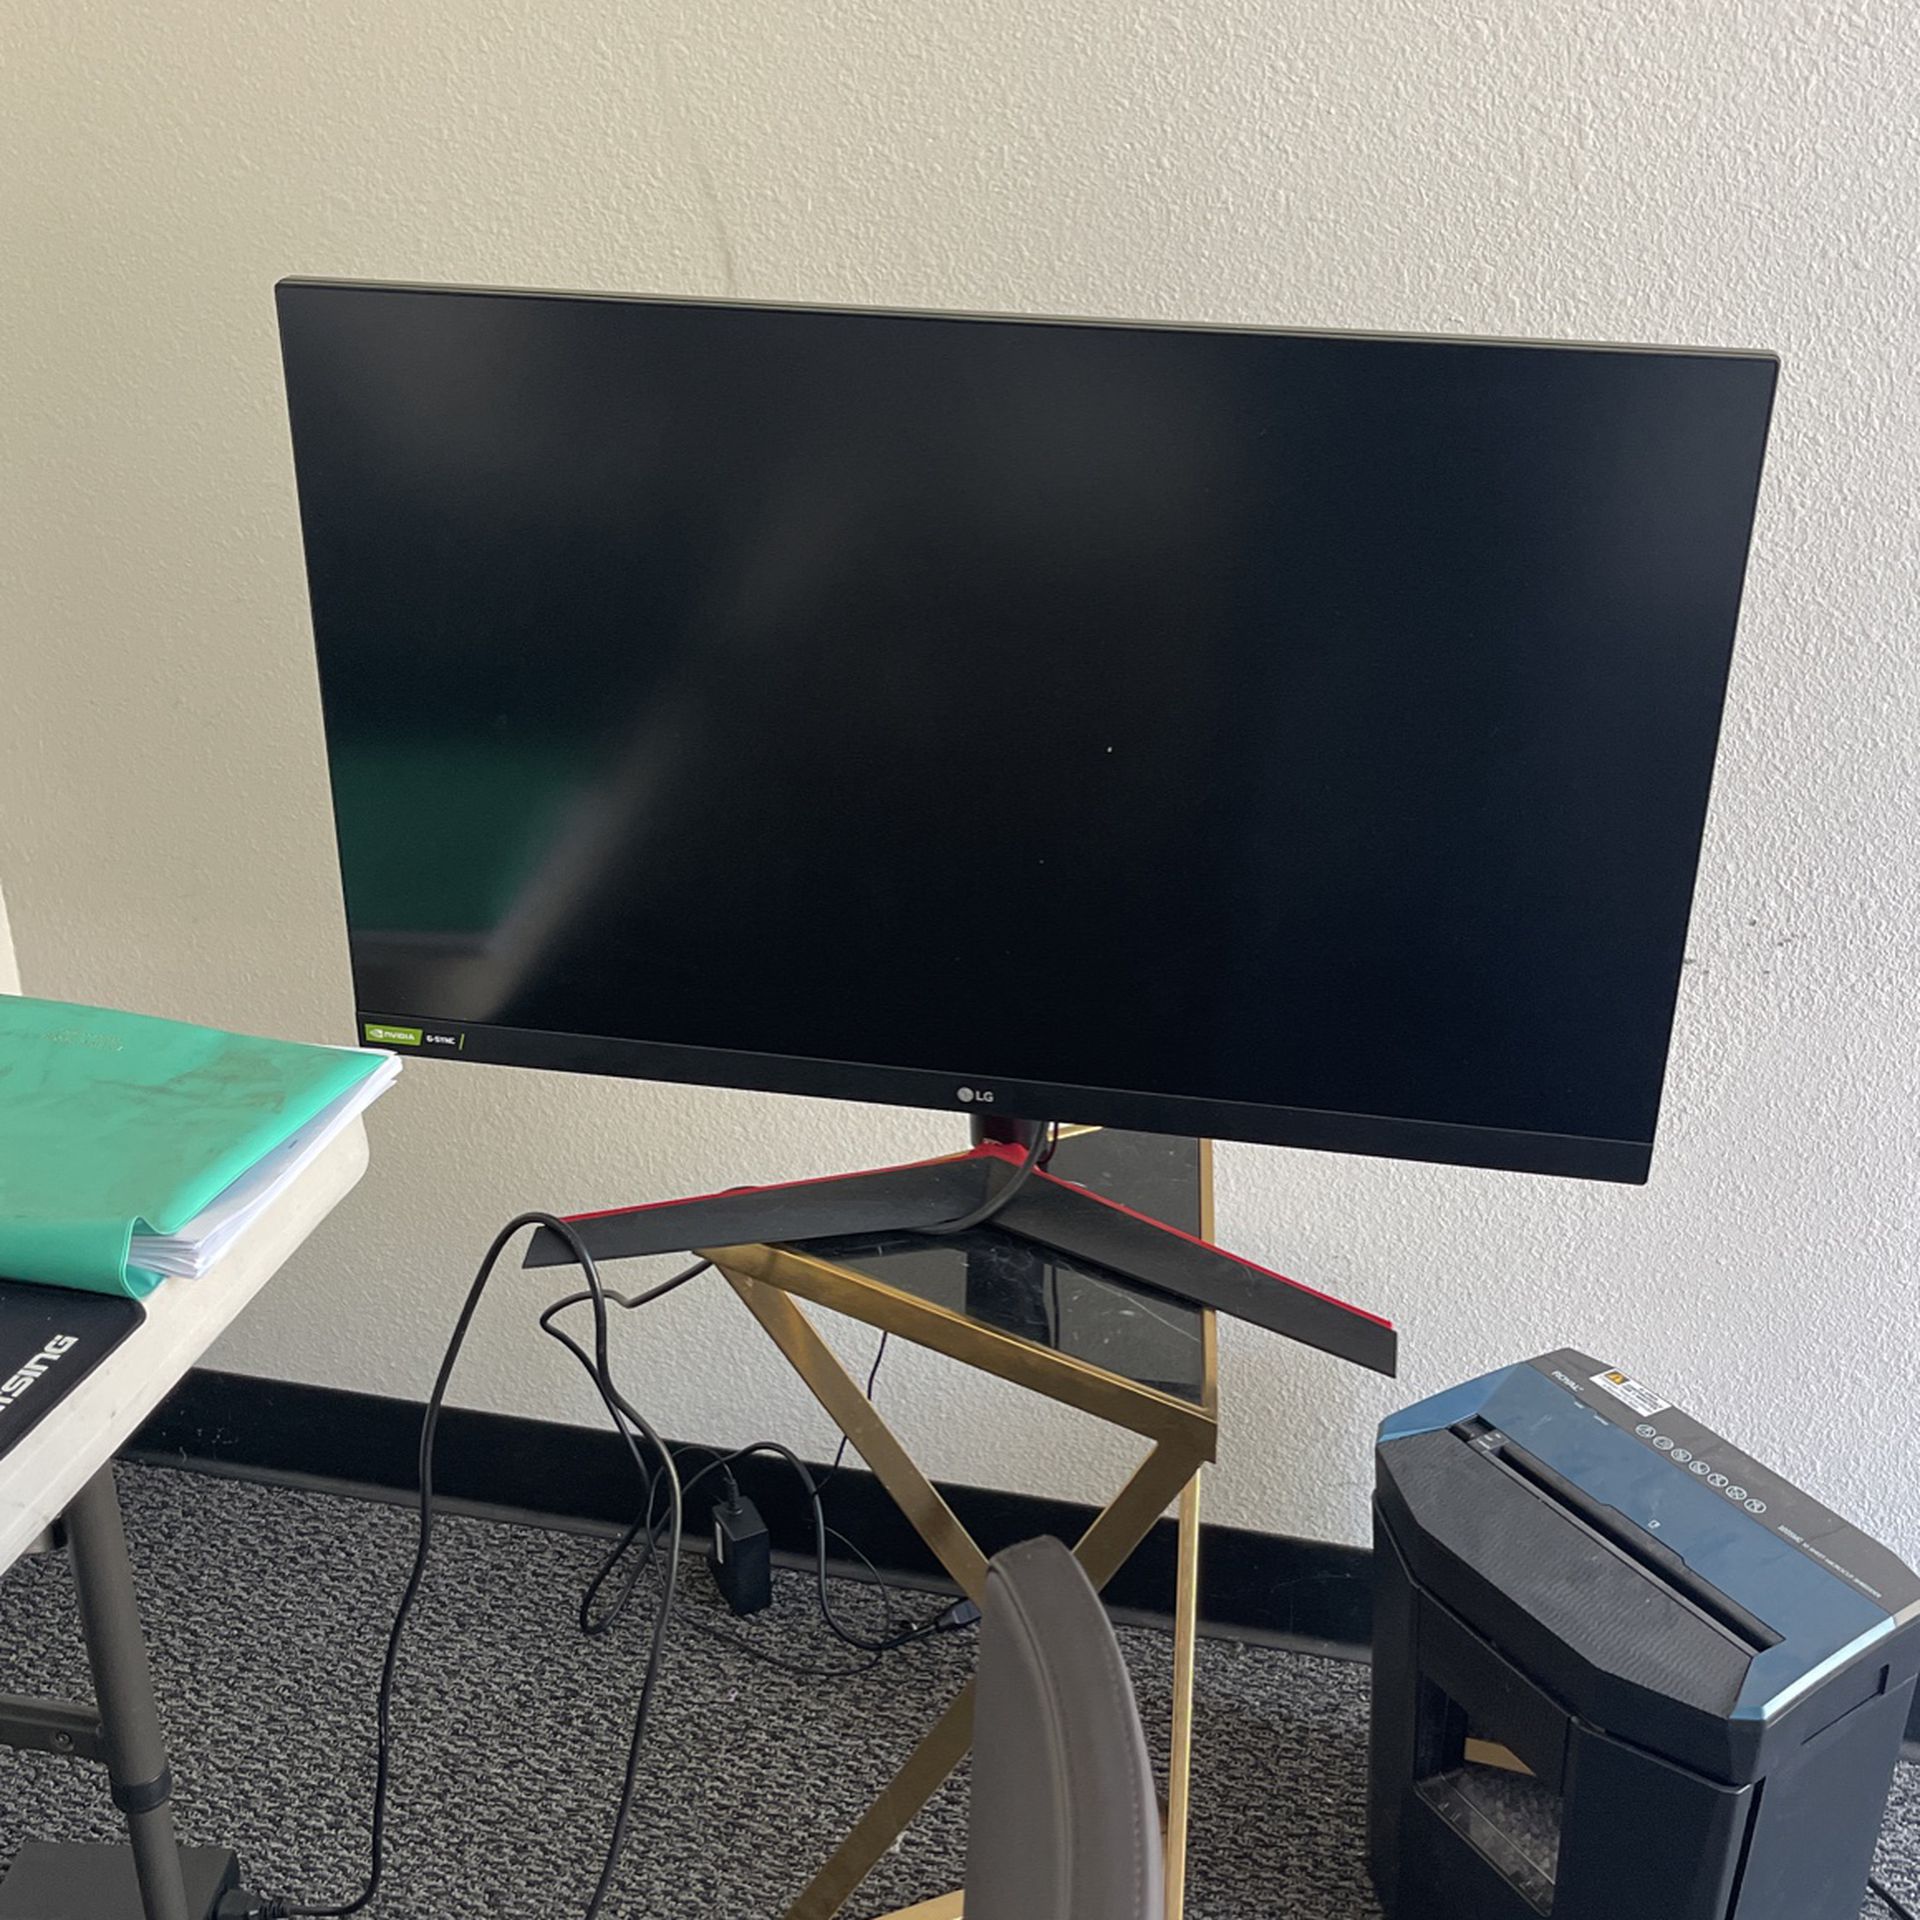 LG Monitor 32” Inch for Sale in Ontario, CA - OfferUp